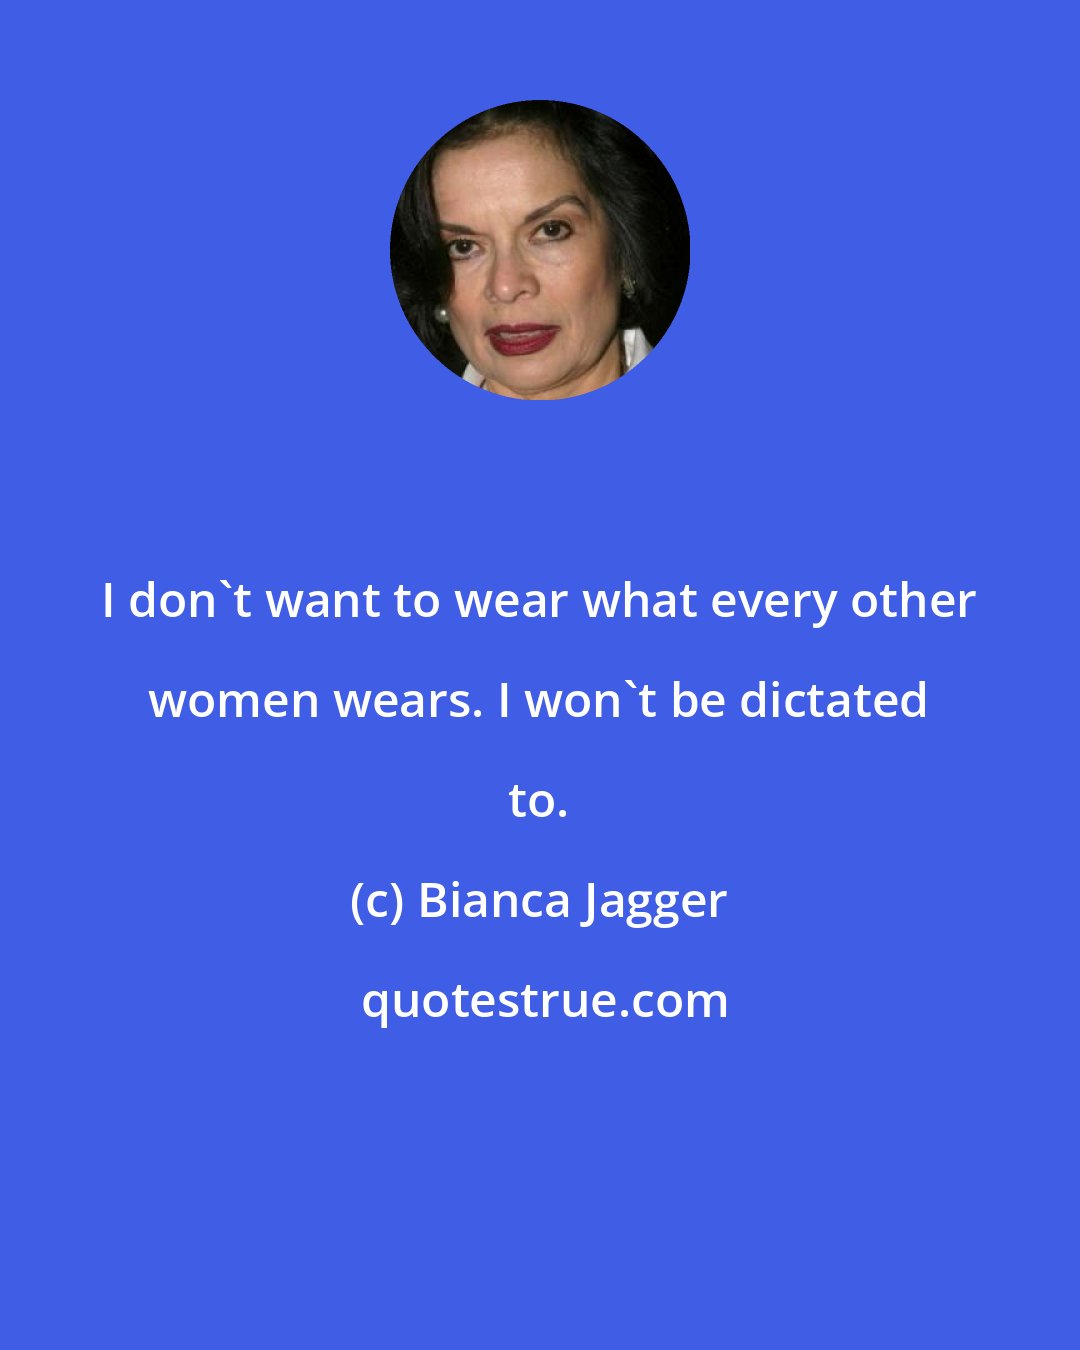 Bianca Jagger: I don't want to wear what every other women wears. I won't be dictated to.